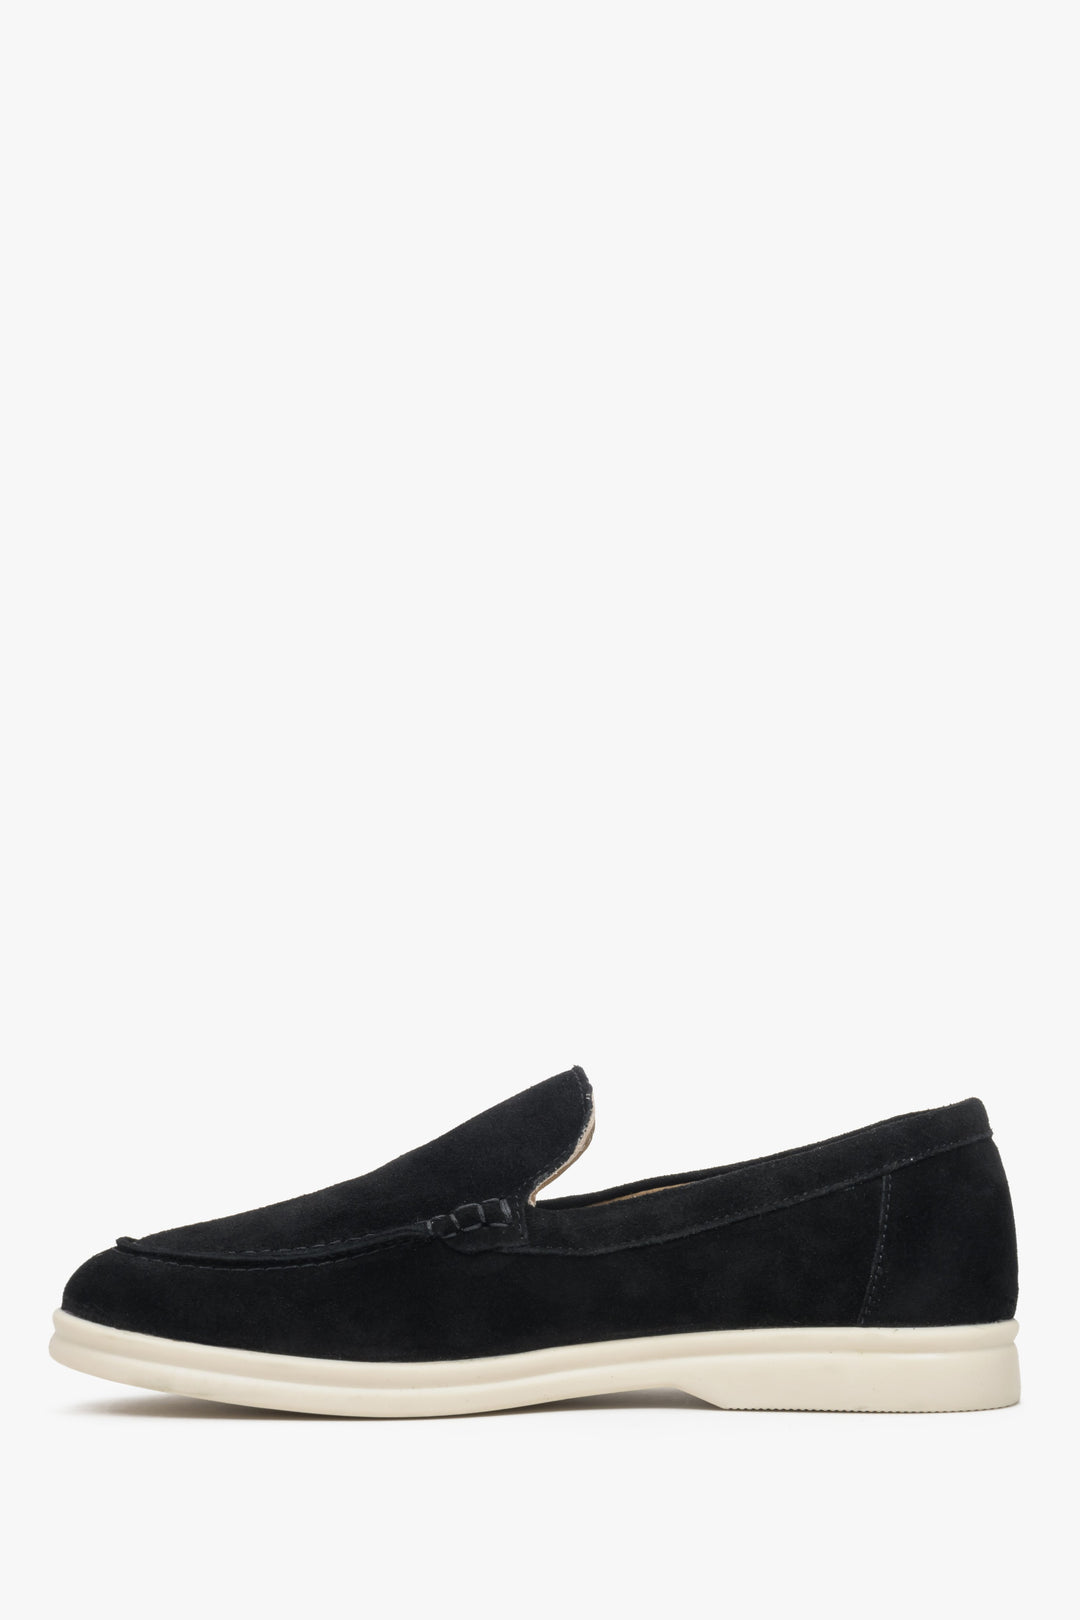 Women's classic black velour loafers - presentation of the footwear from the other side.